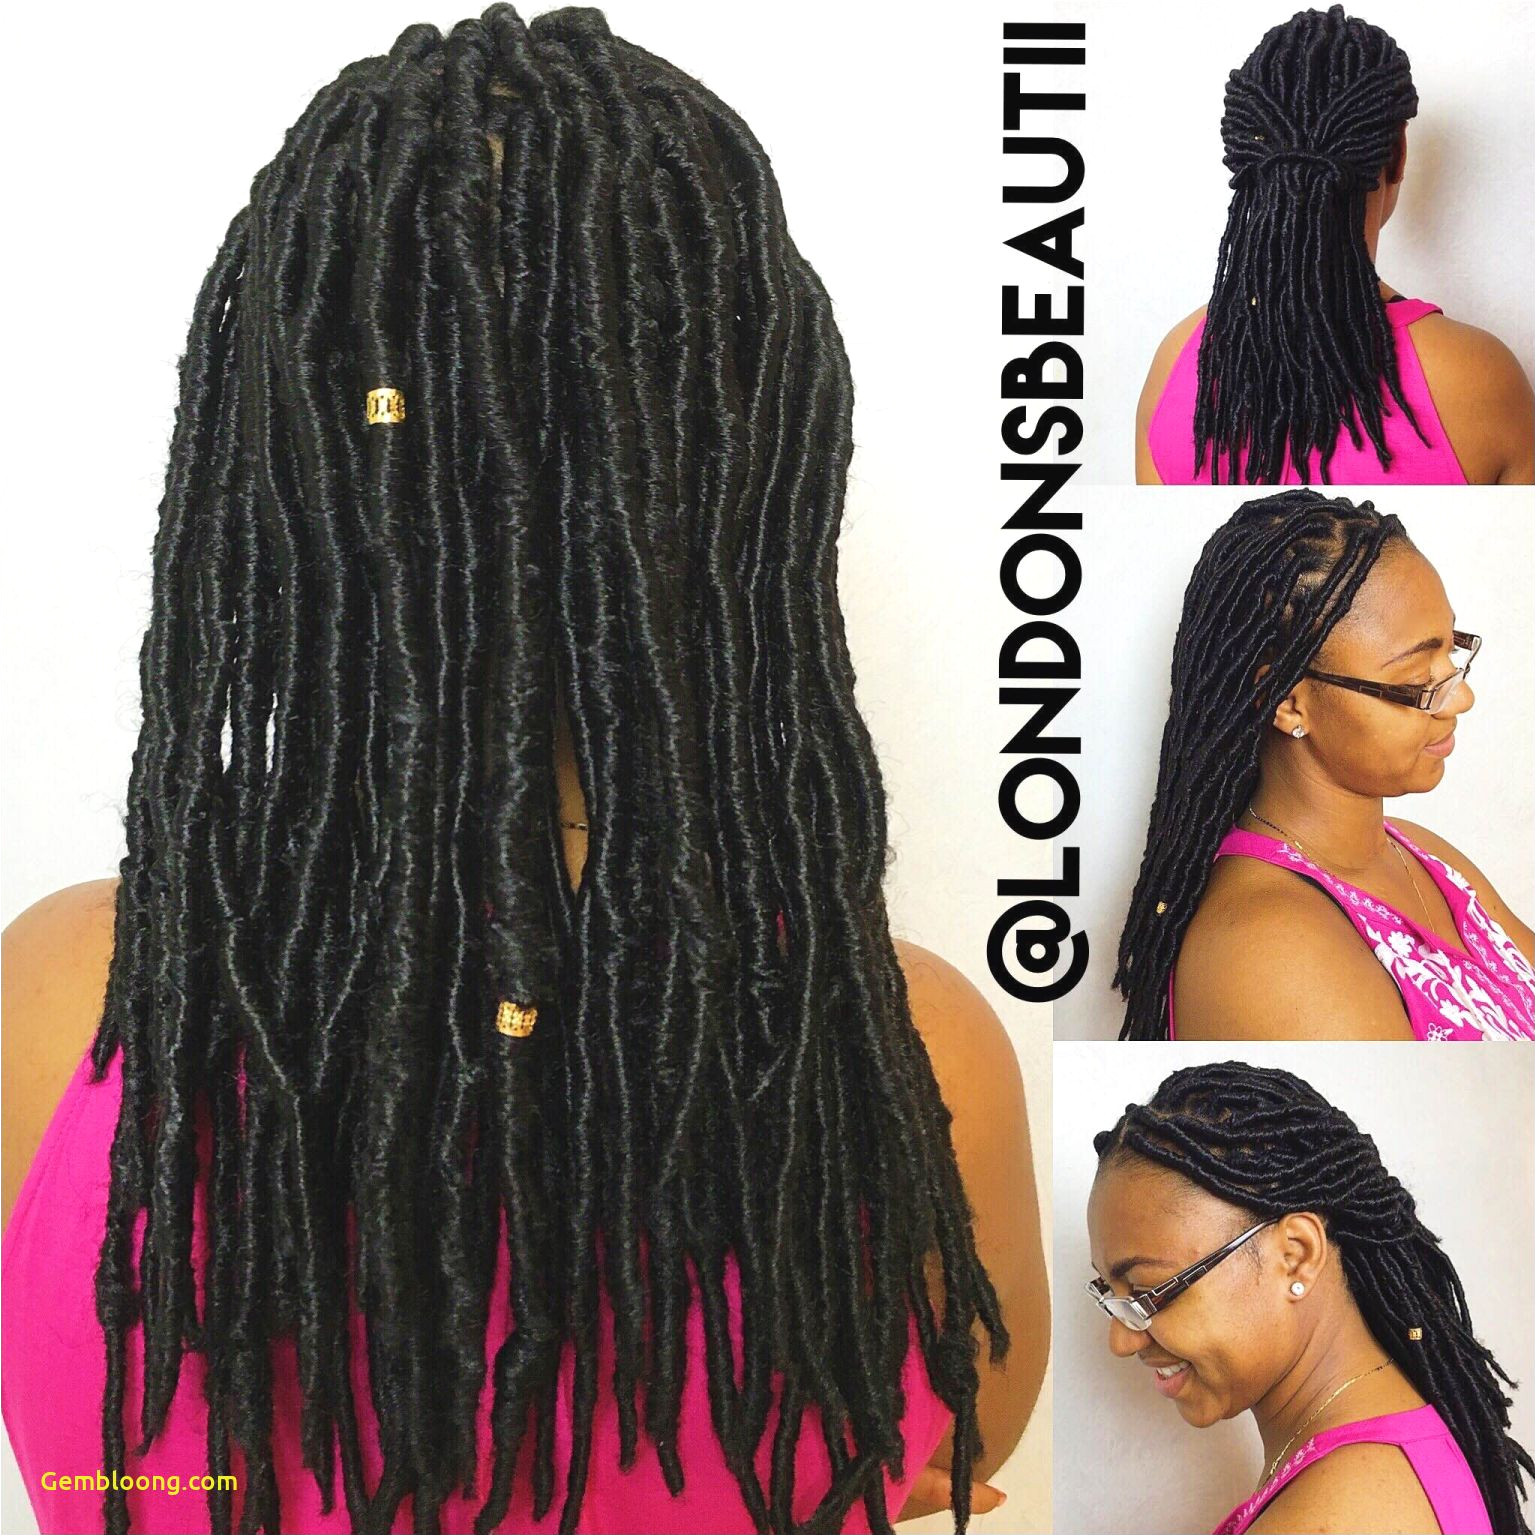 Two Strand Twist Hairstyles Luxury Loc Hairstyles Awesome Dreadlocks Hairstyles 0d